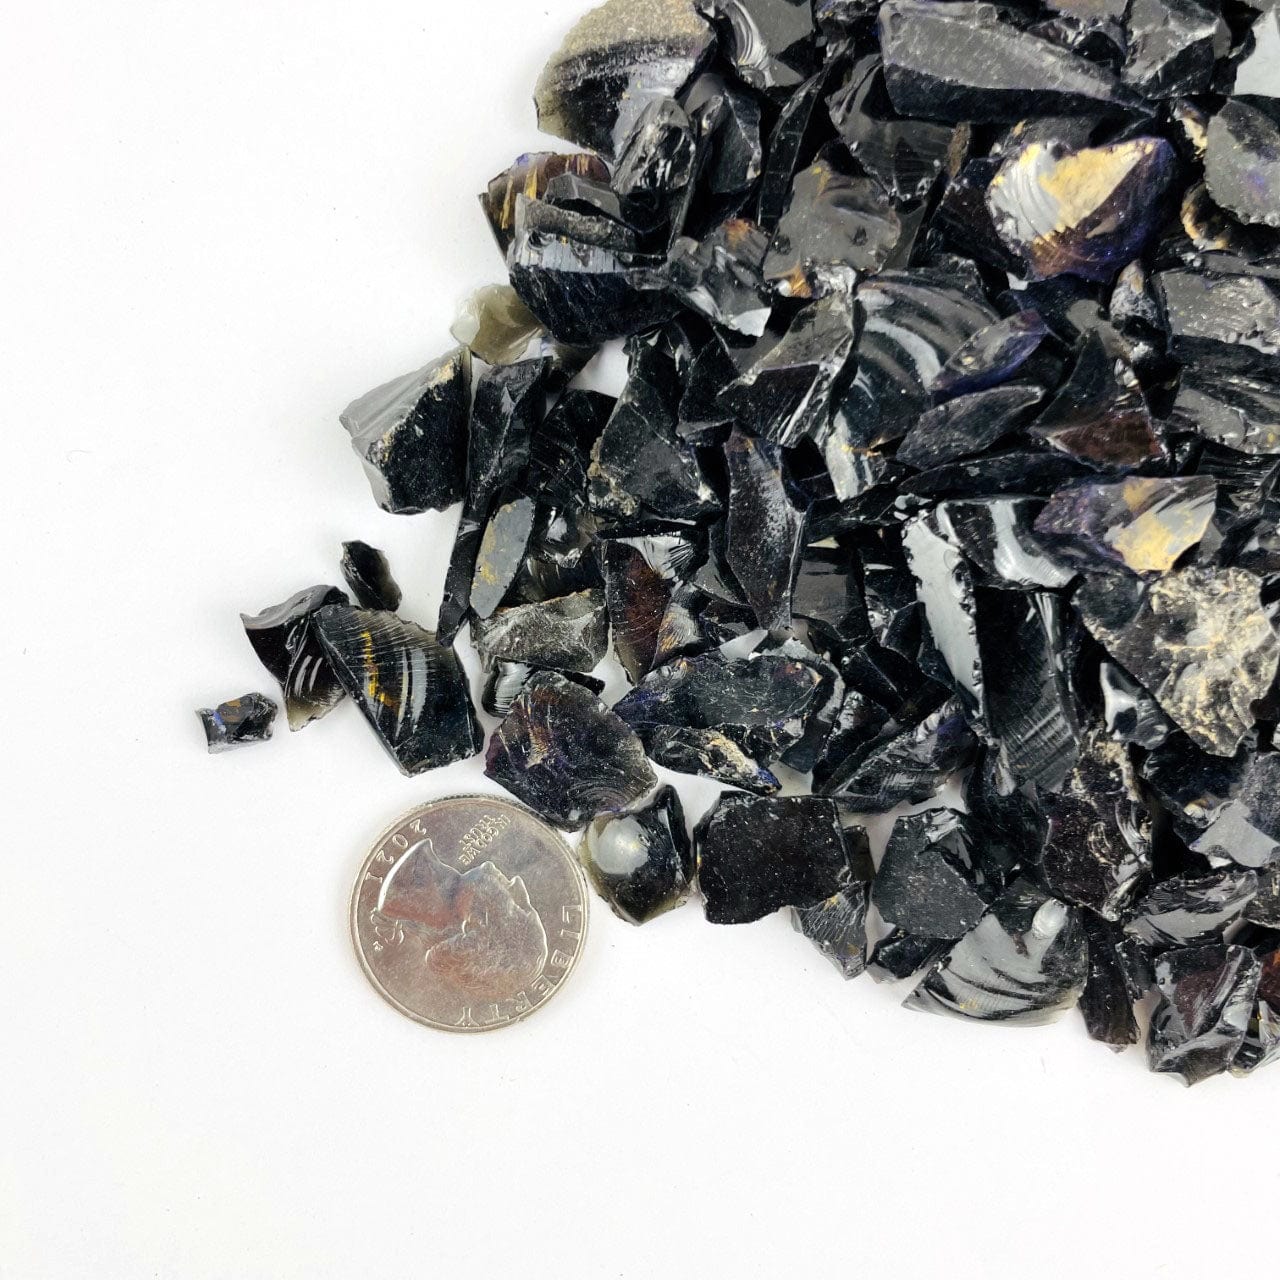 Black Obsidian Stones next to a quarter for sizing